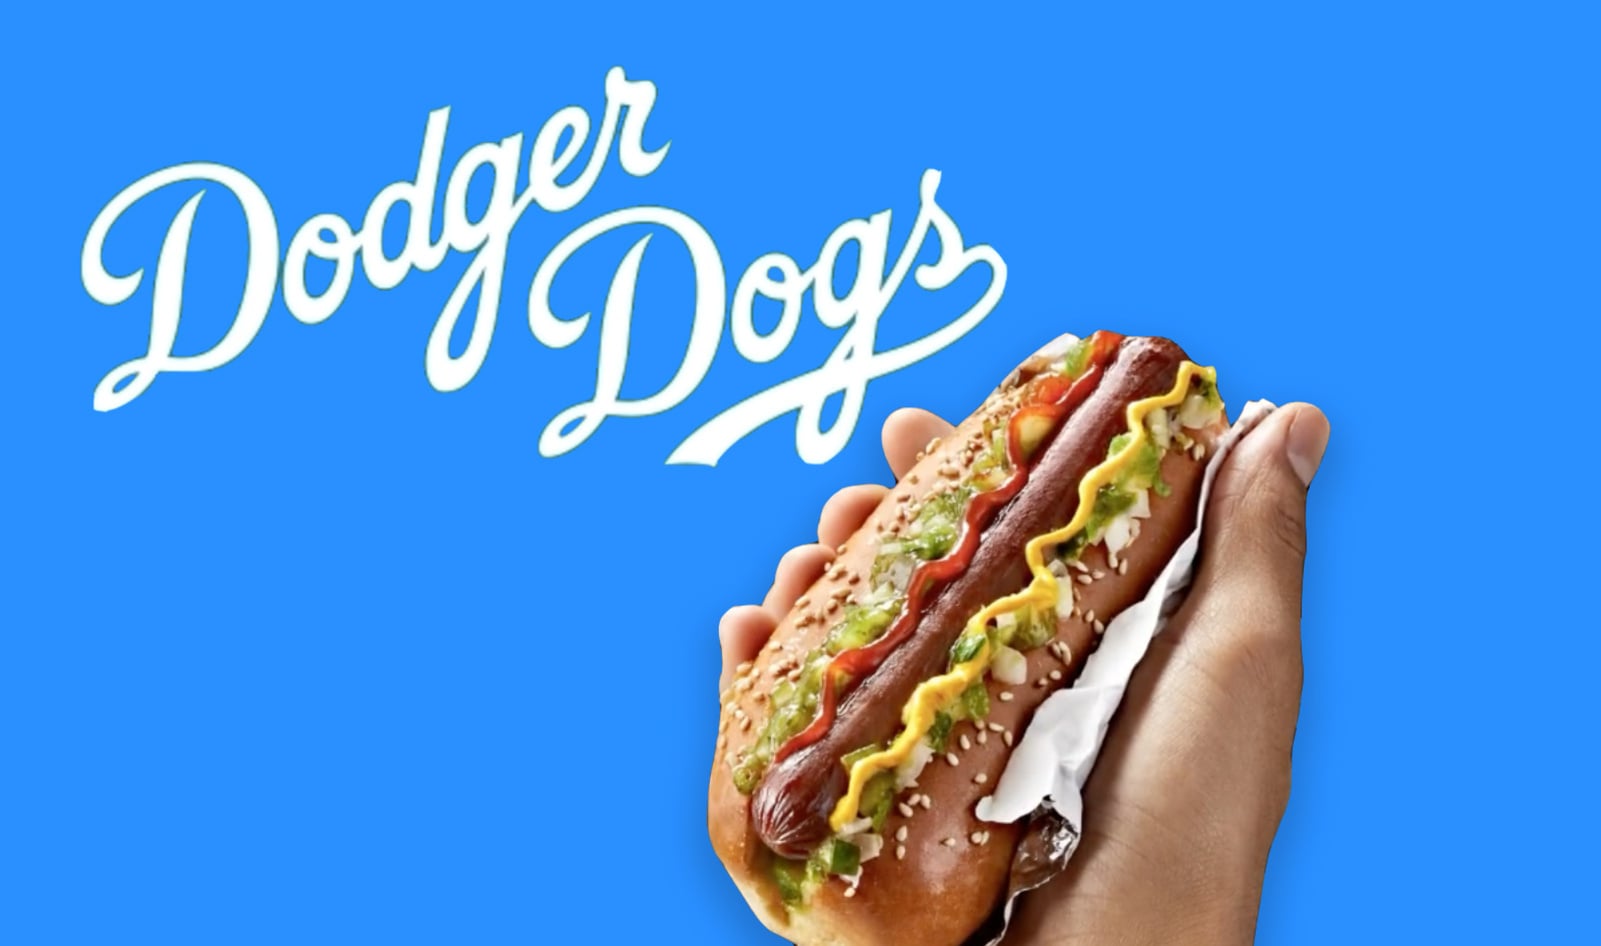 There Is Now an Official Plant-Based Dodger Dog